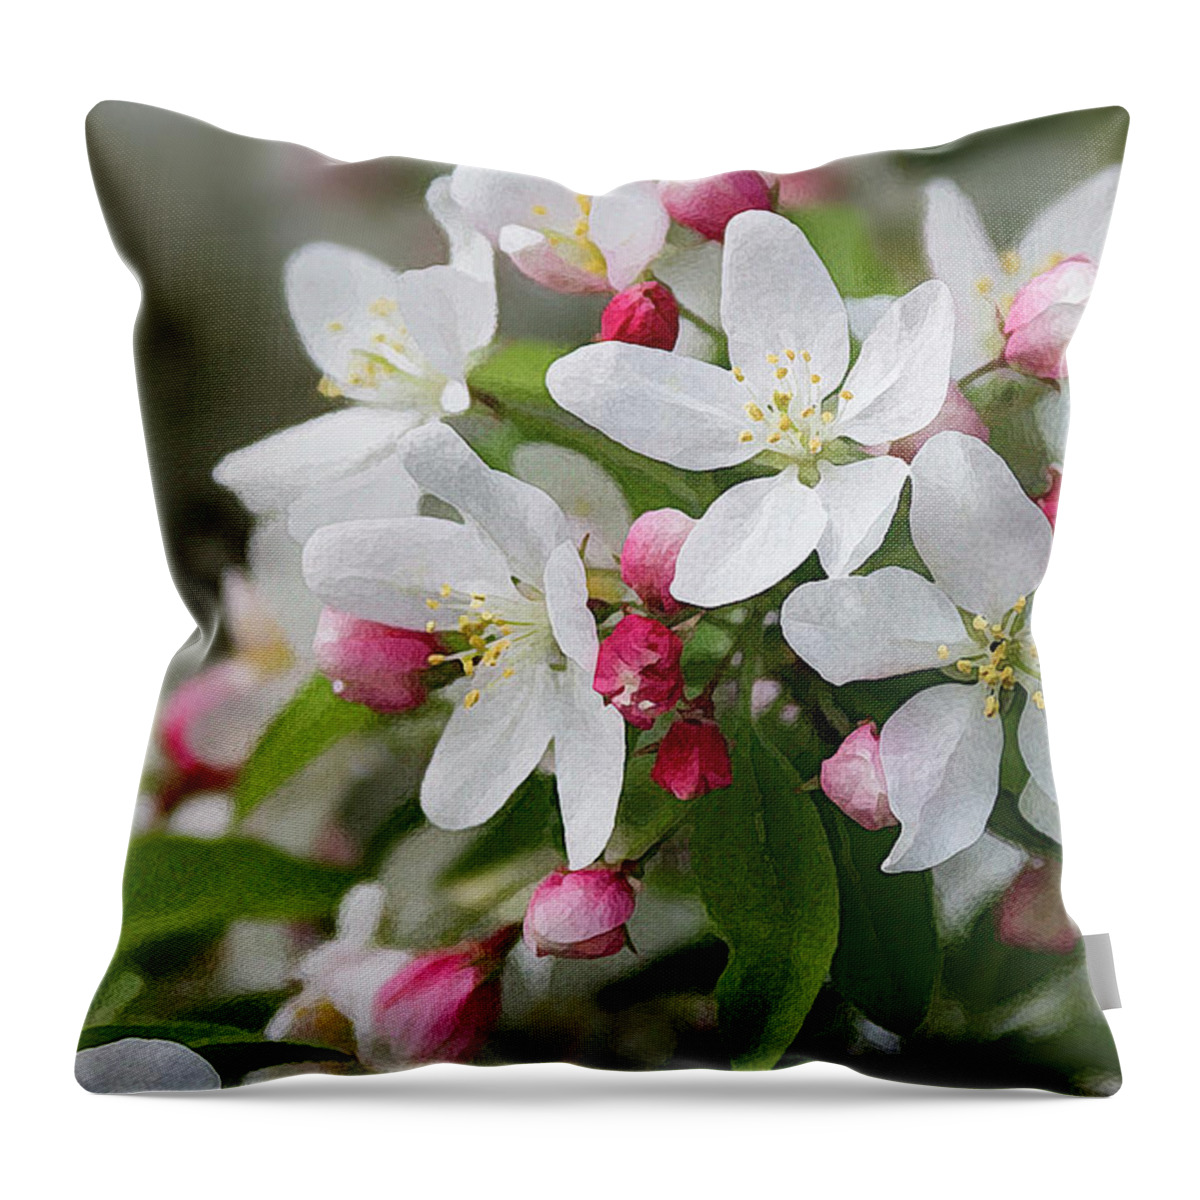 Crabapple Blossoms Throw Pillow featuring the photograph Crabapple Blossoms 12 - by Julie Weber